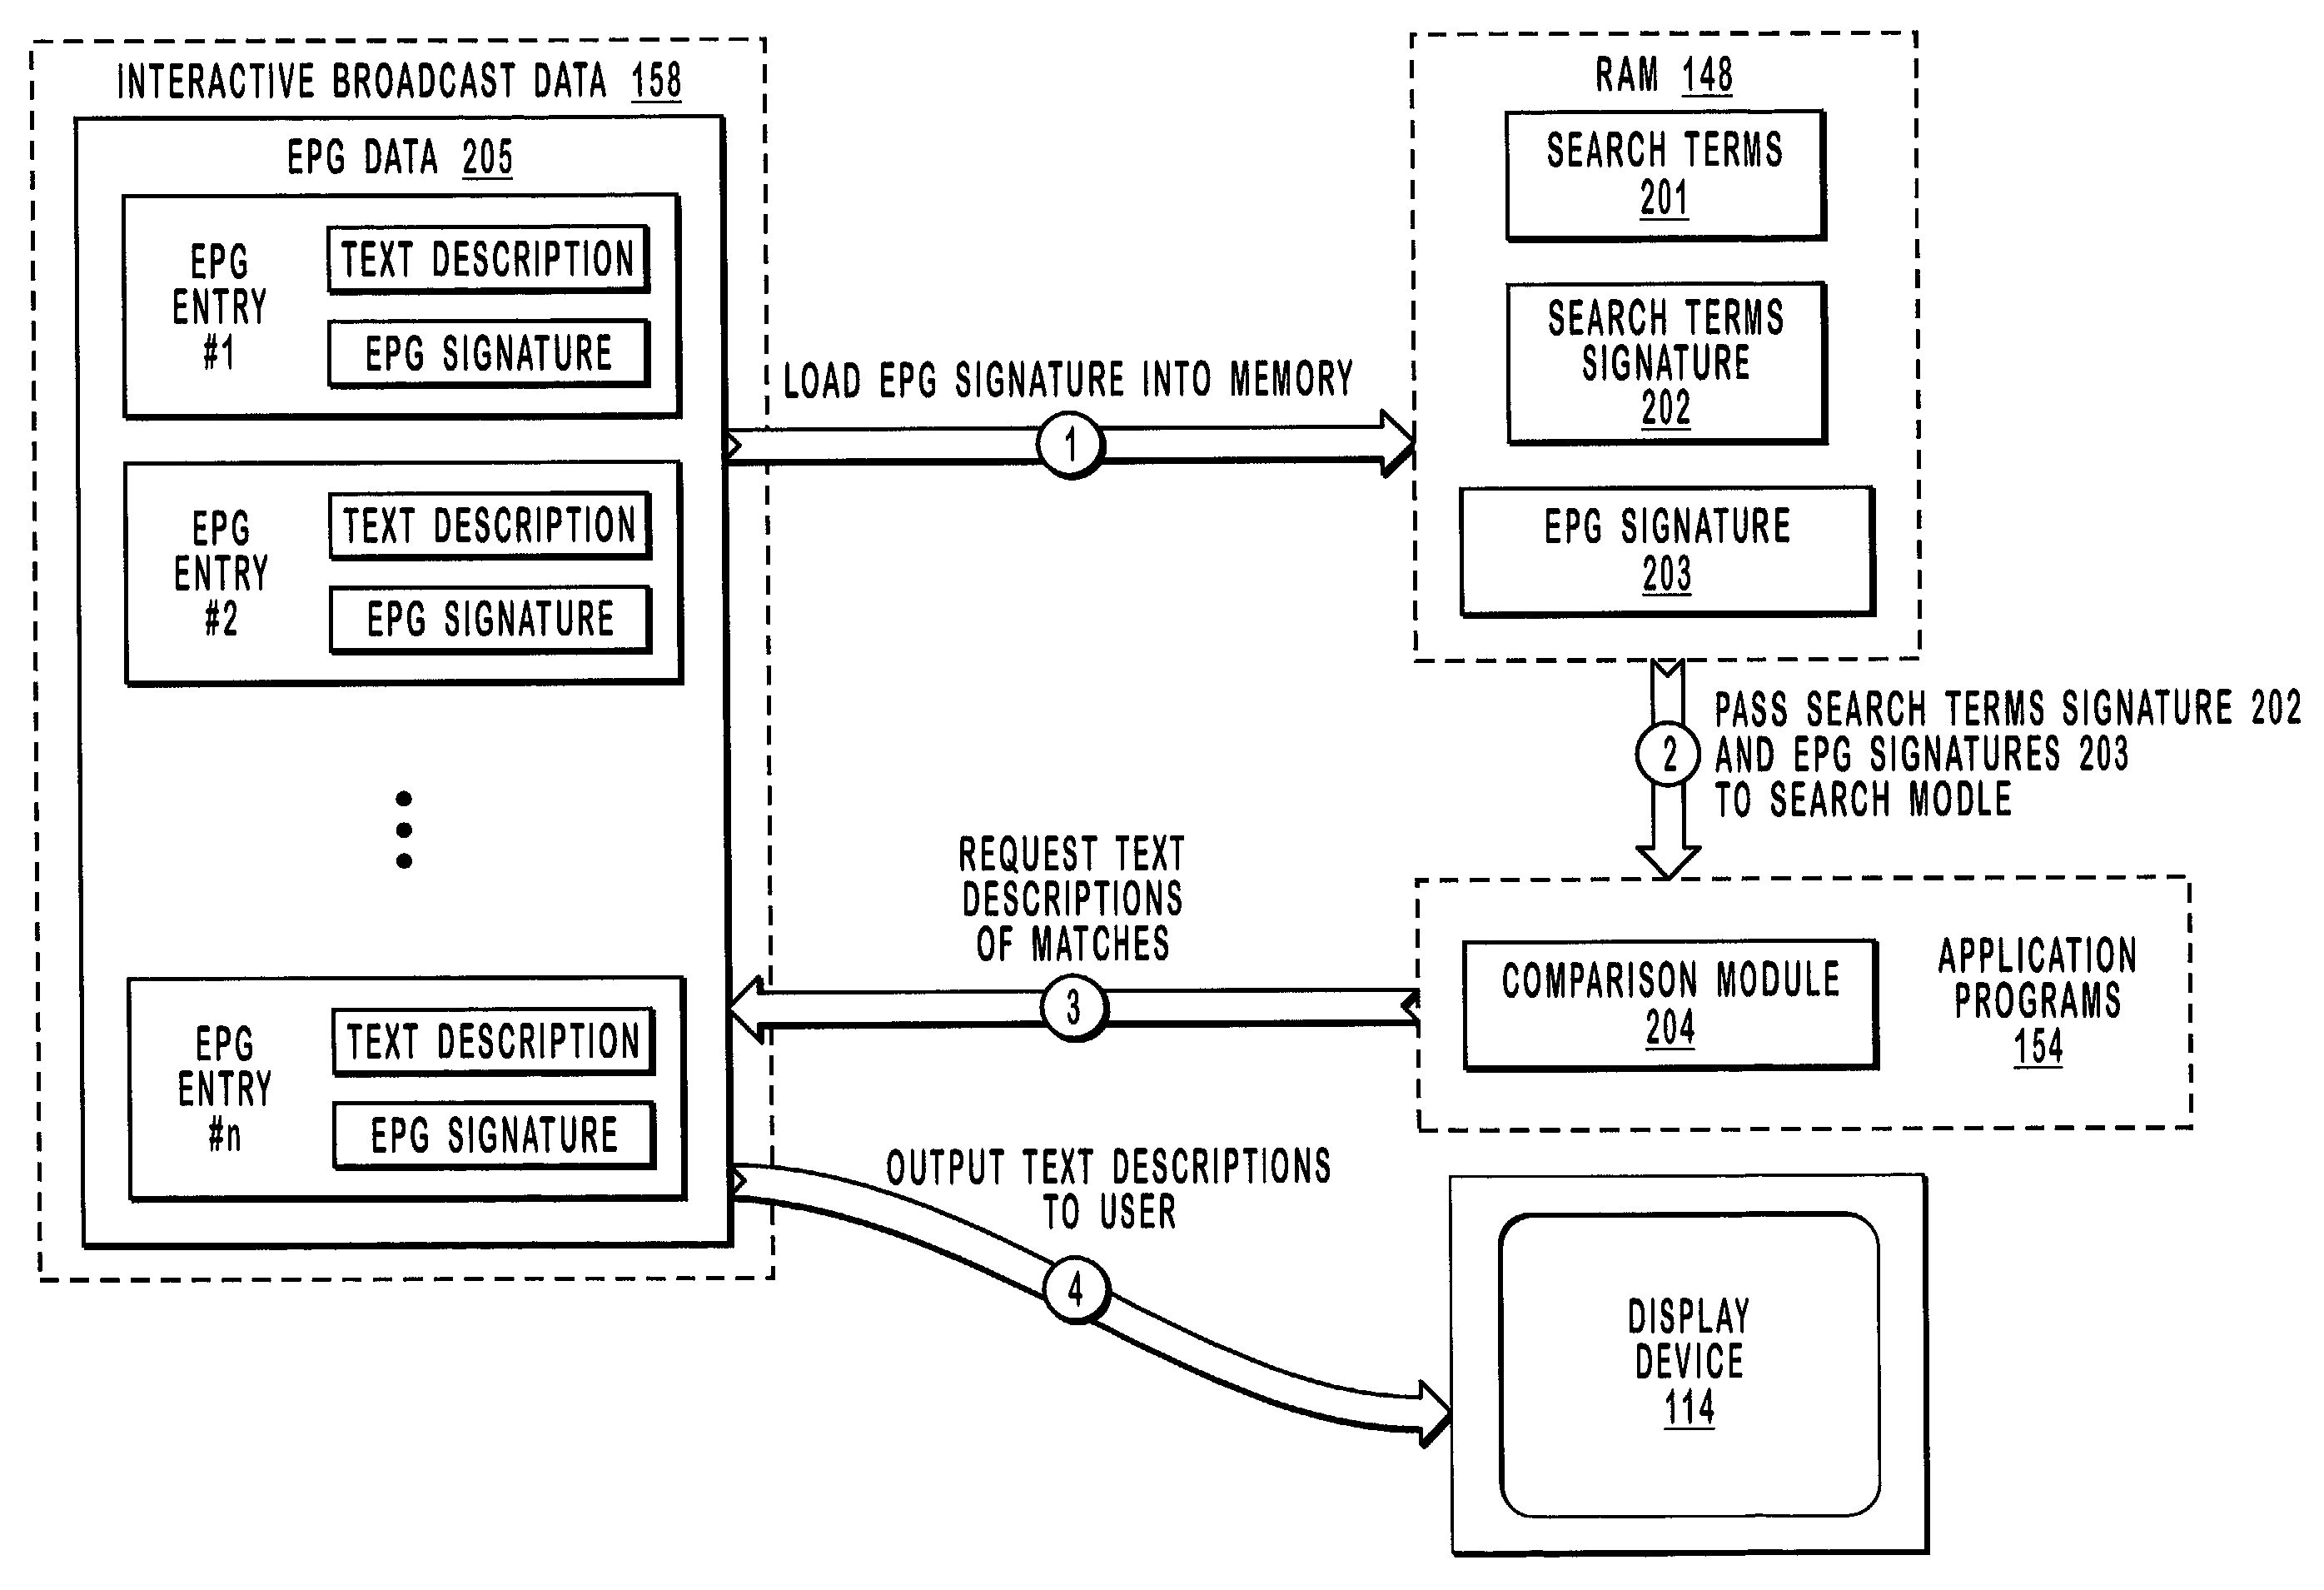 System and methods for searching interactive broadcast data